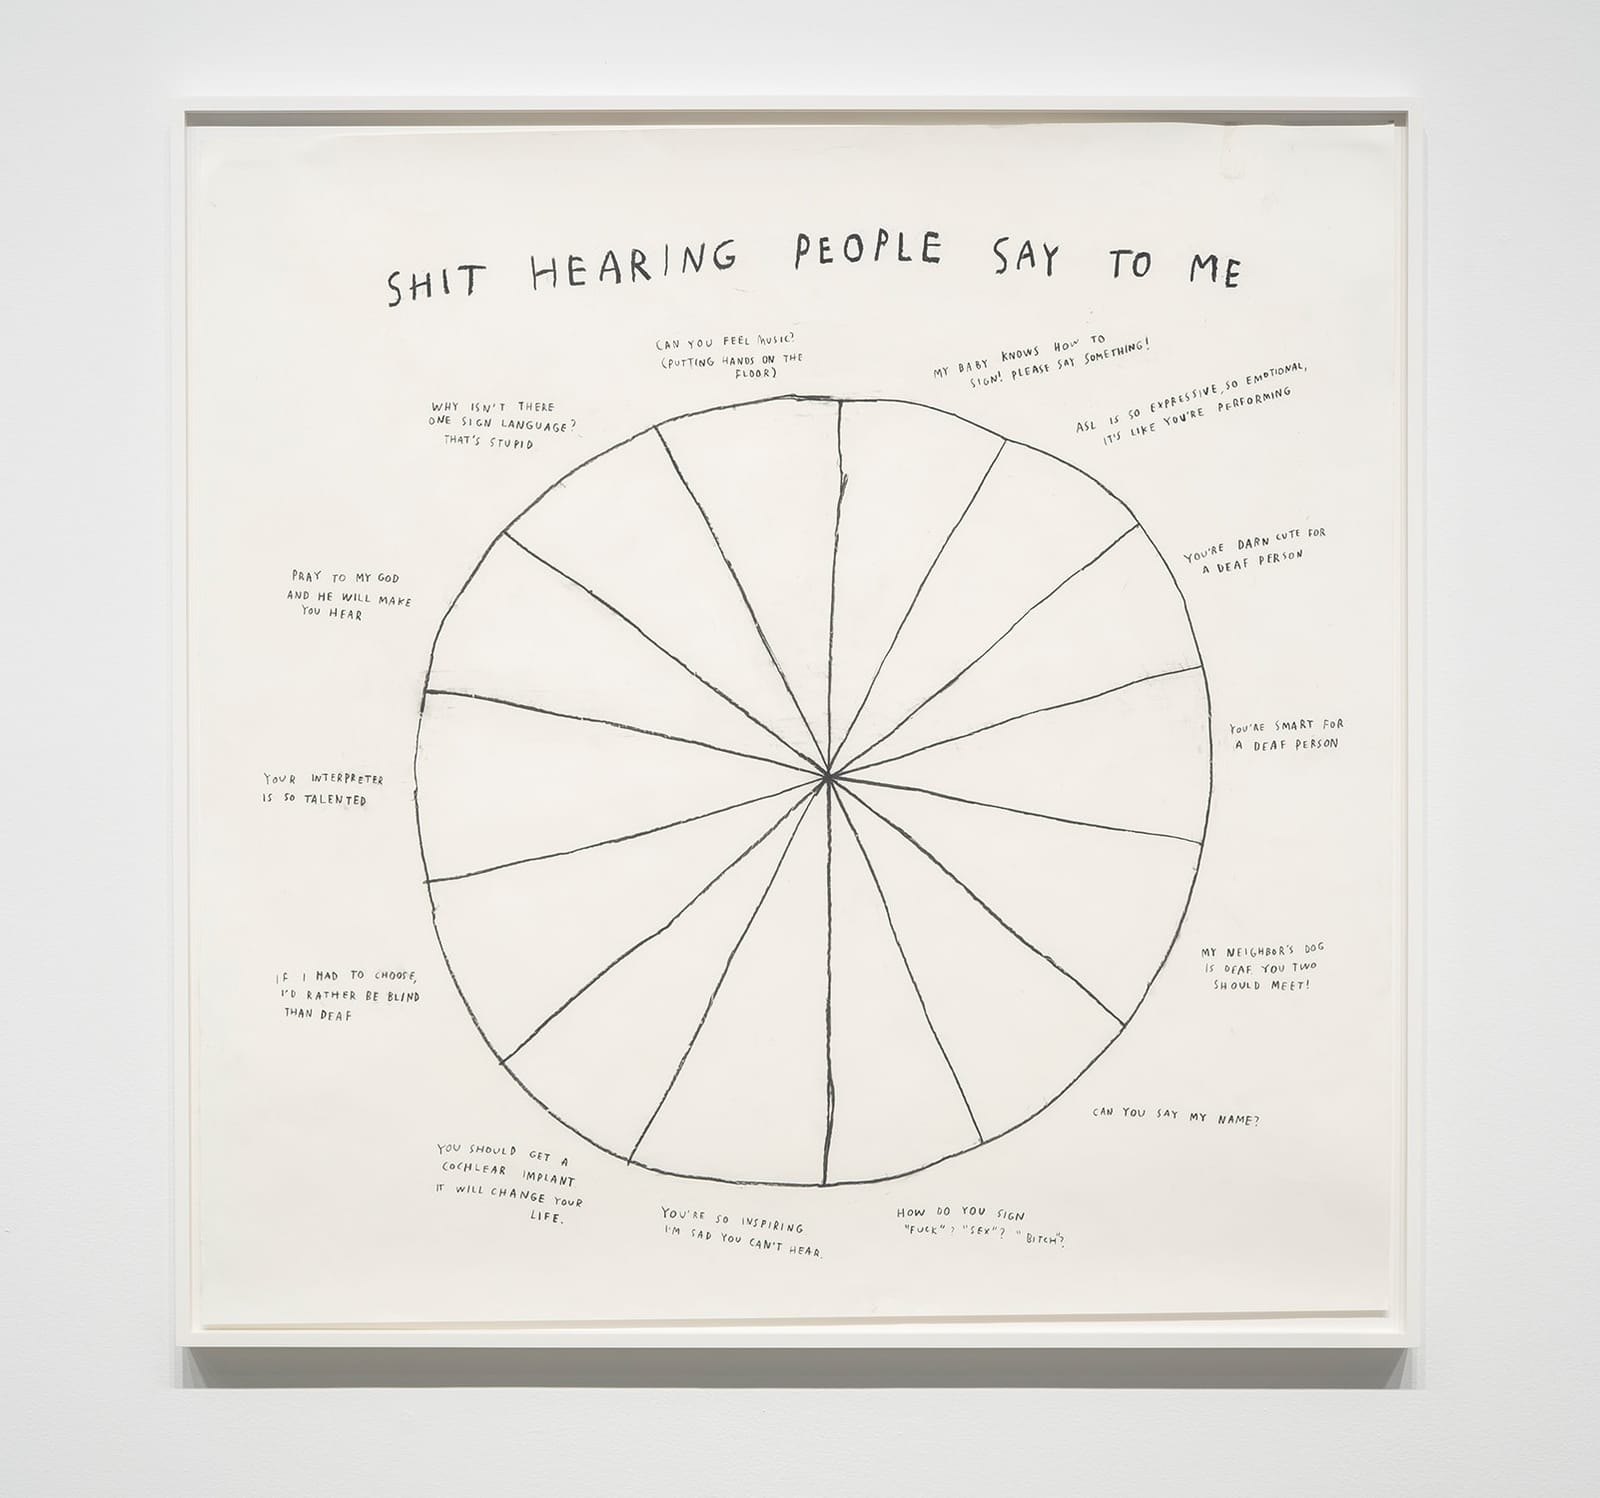 Drawing of pie chart by Christine Sun Kim title "Shit hearing people say to me".